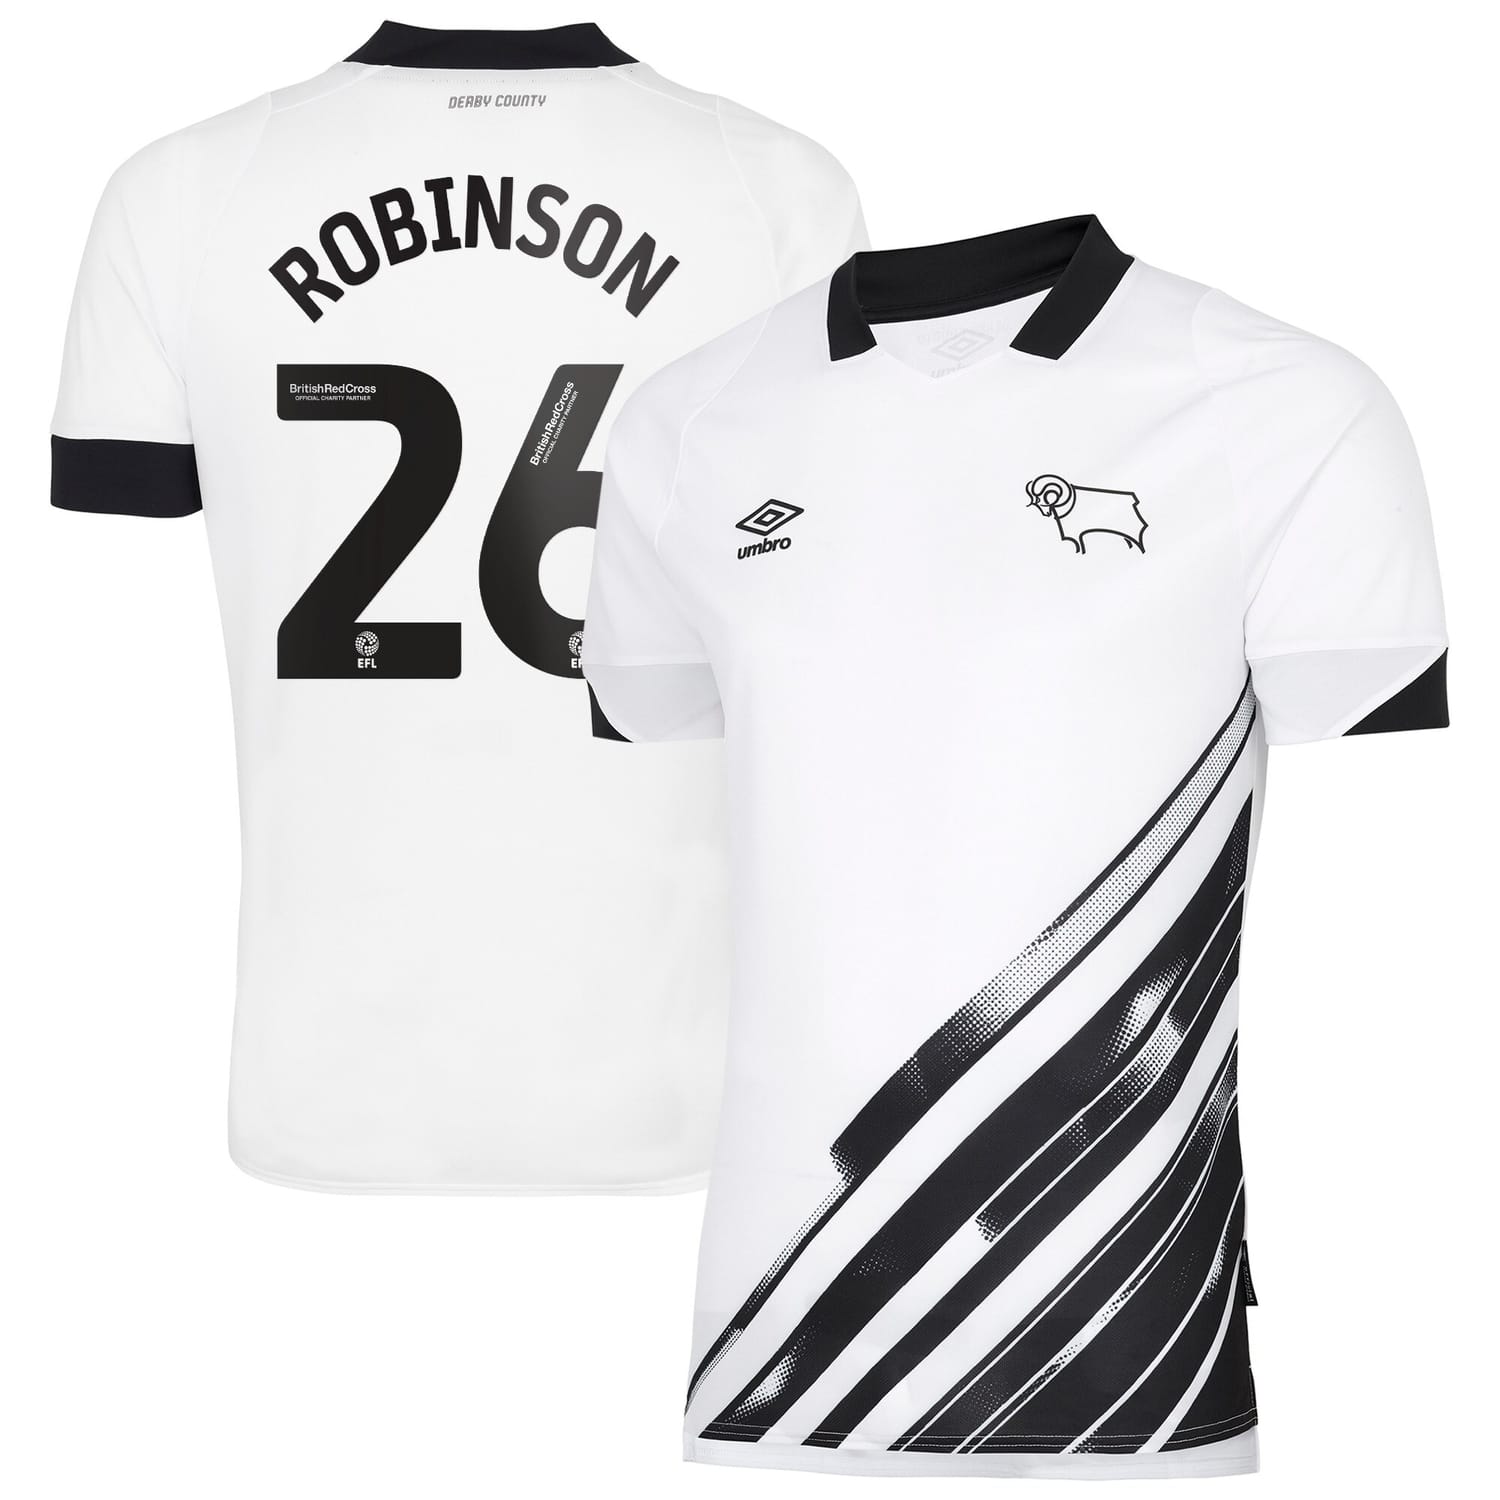 EFL League One Derby County Home Jersey Shirt 2022-23 player Robinson 26 printing for Men